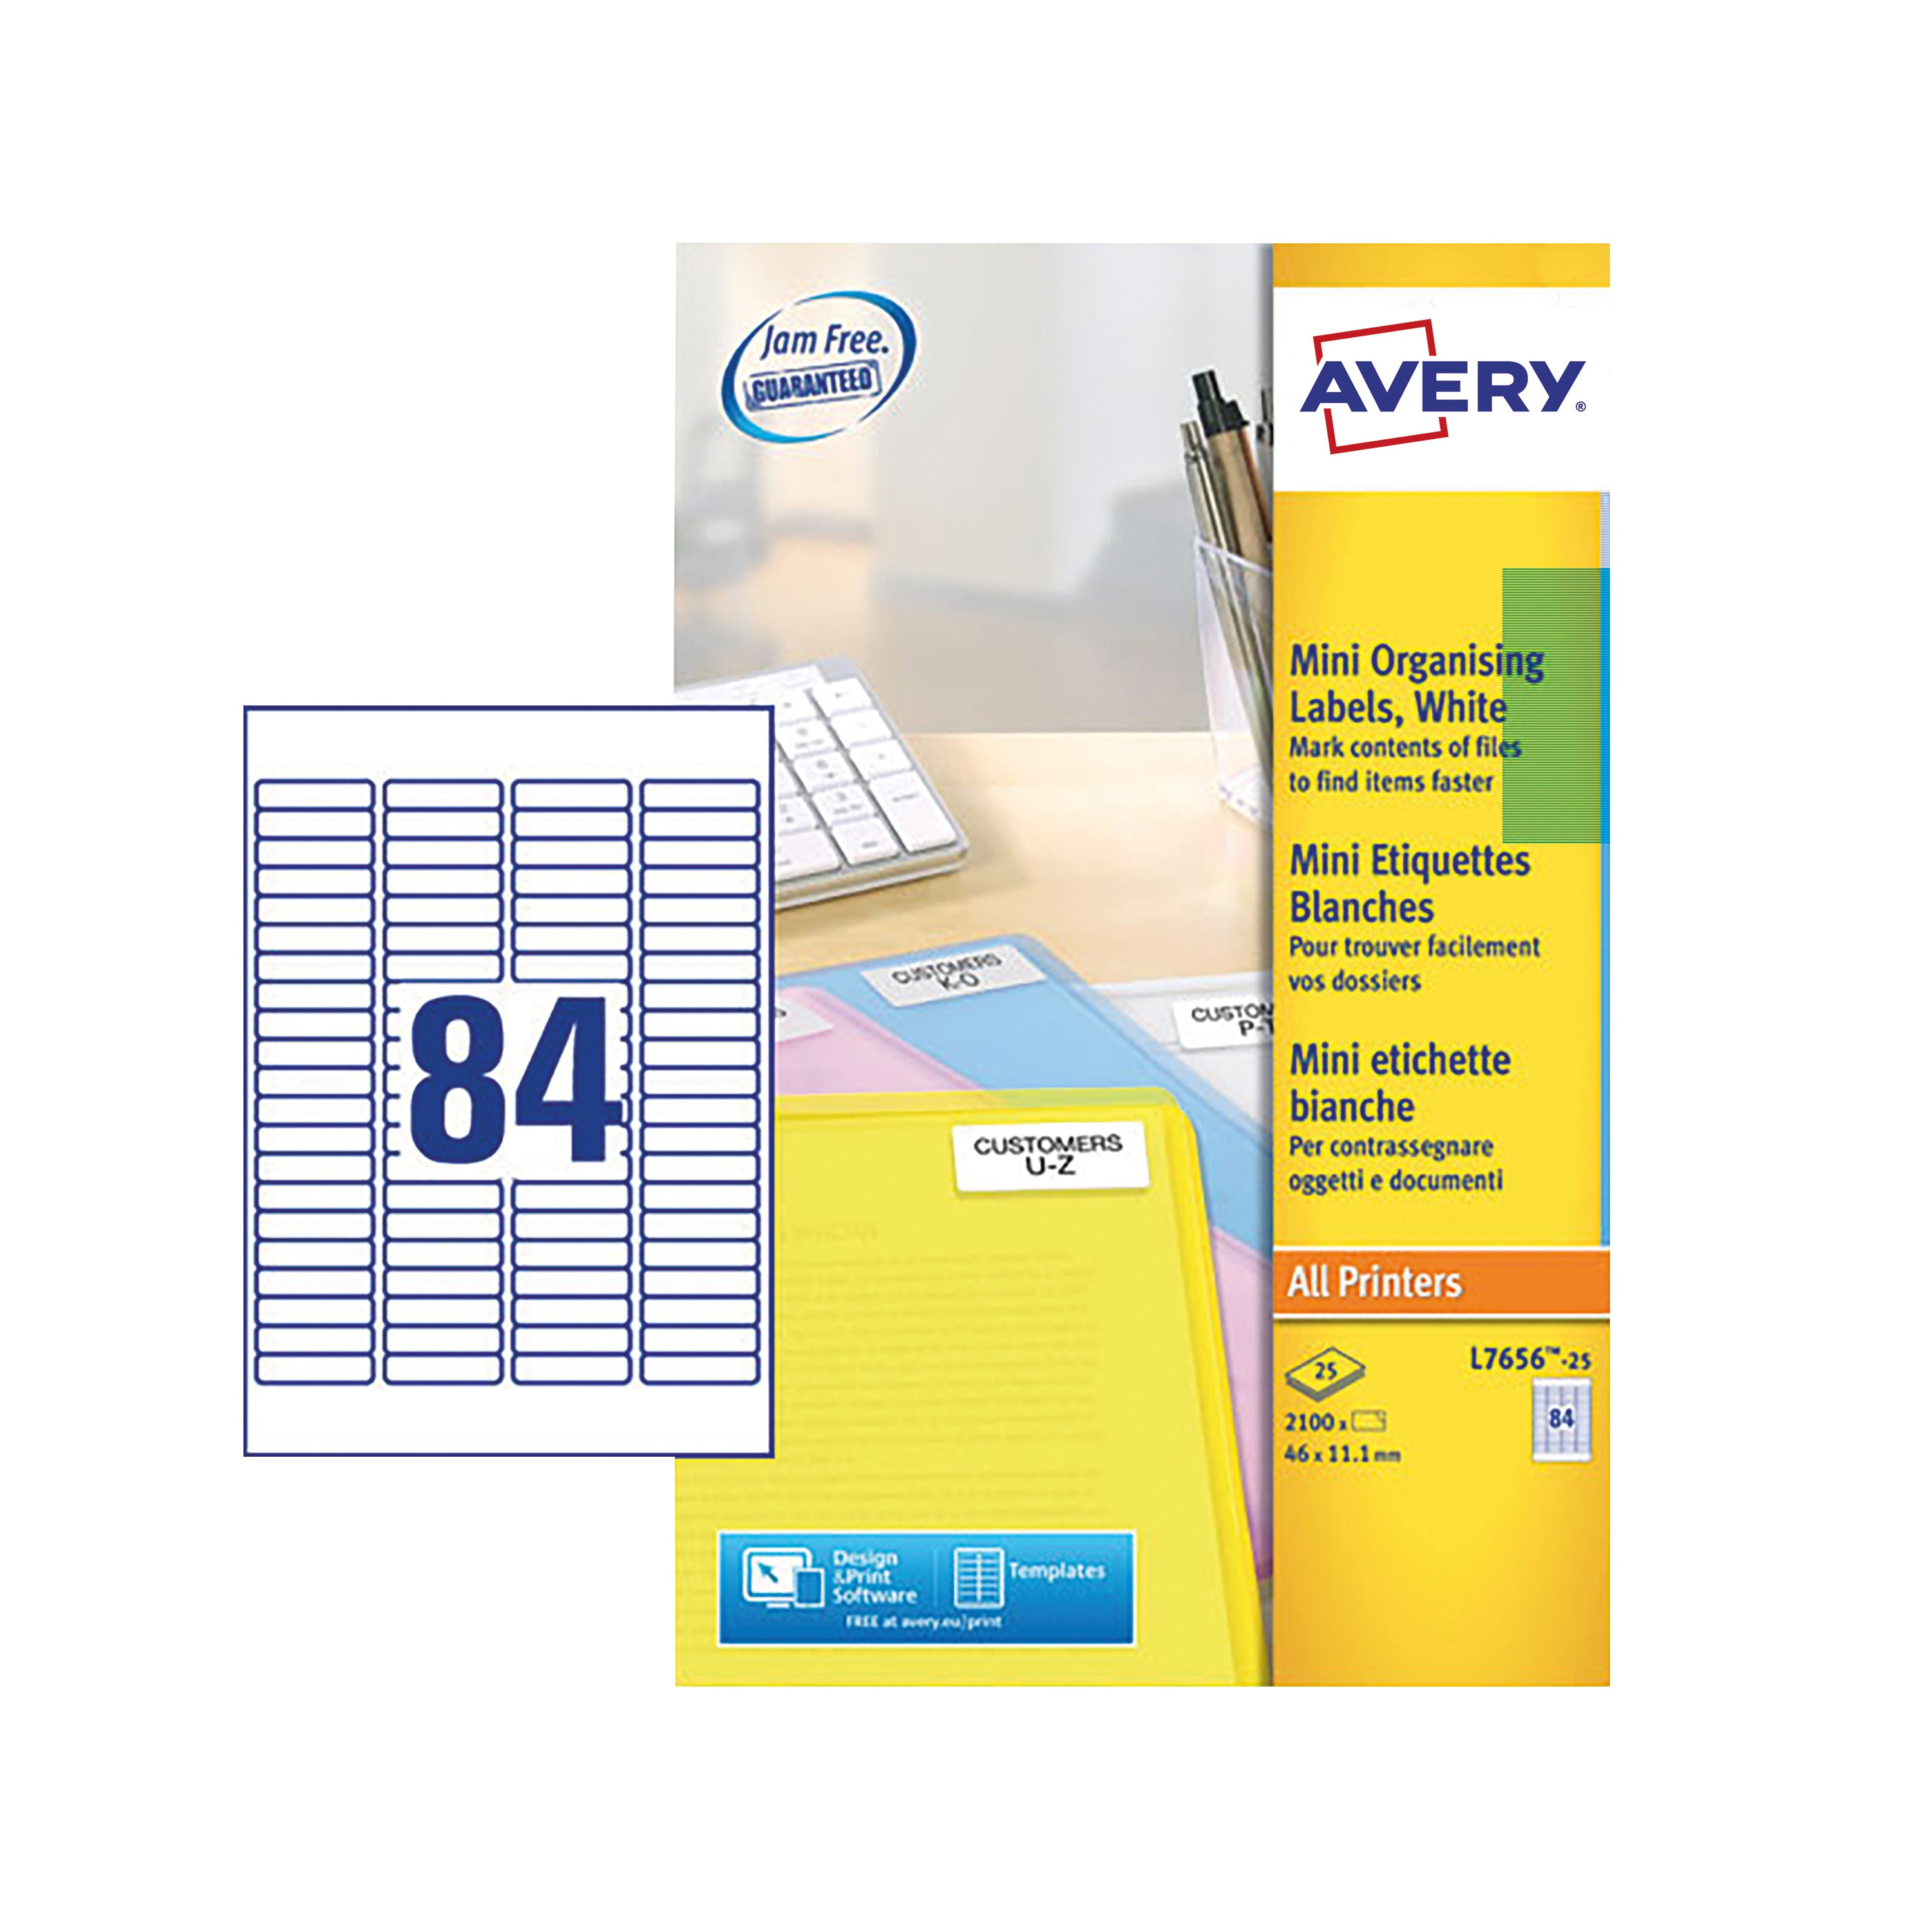 Avery Laser Labels 46x11.11mm 84 Per Sheet White(Pack of 2100)L7656-25